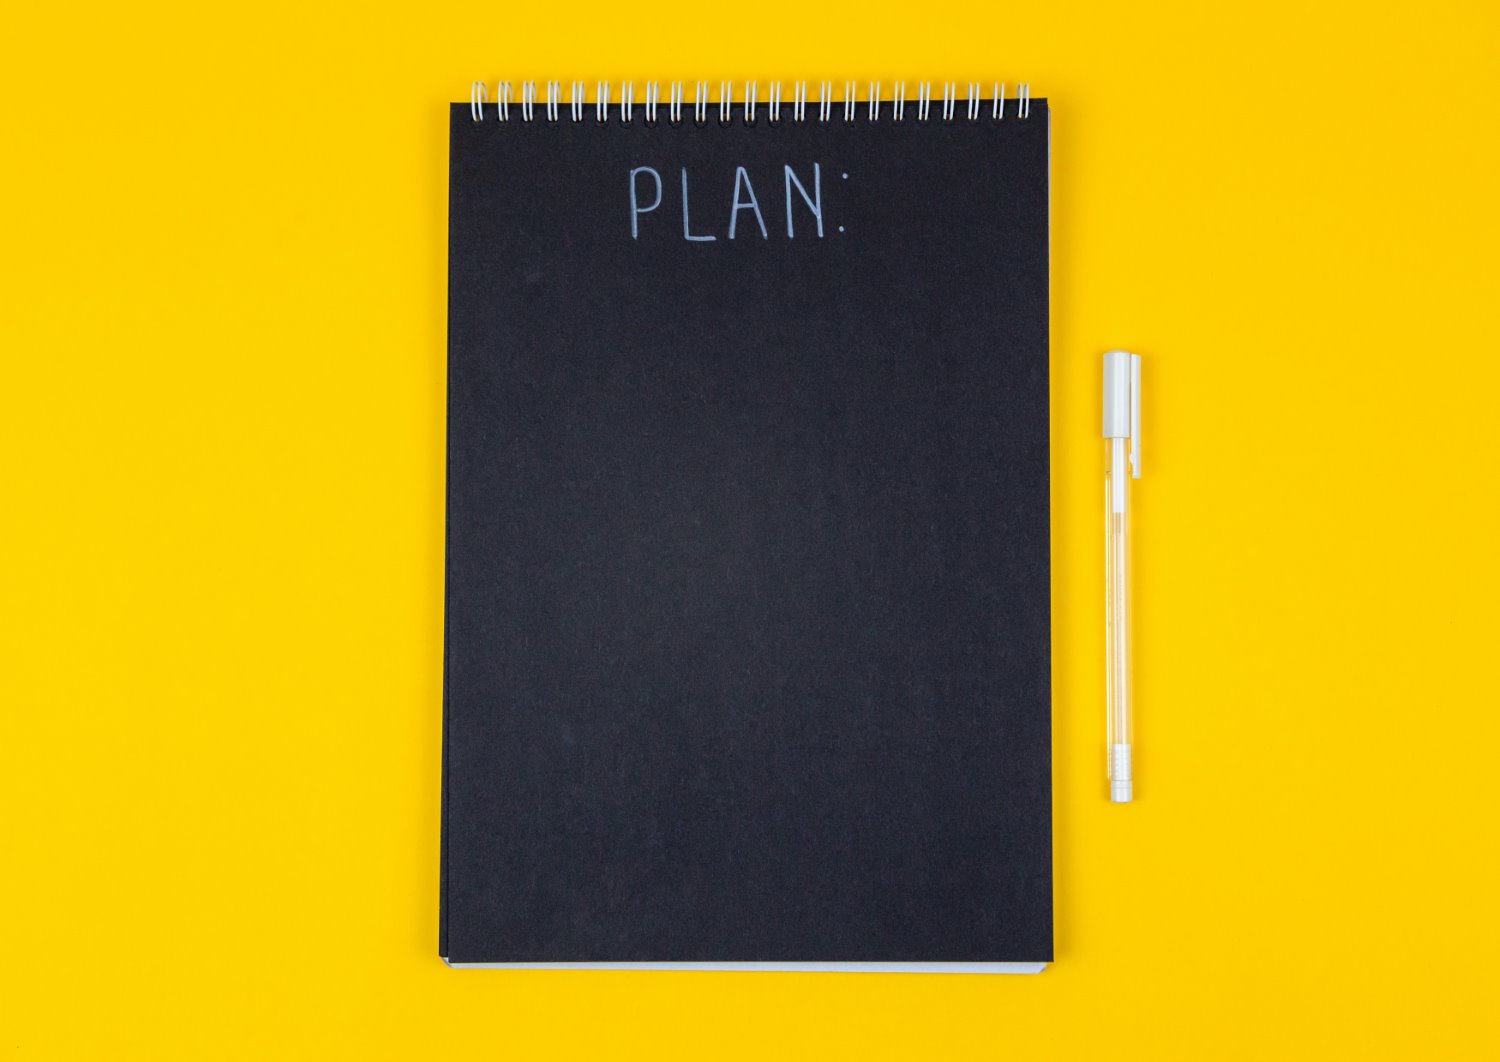 A black notebook with "plan" written across the cover.